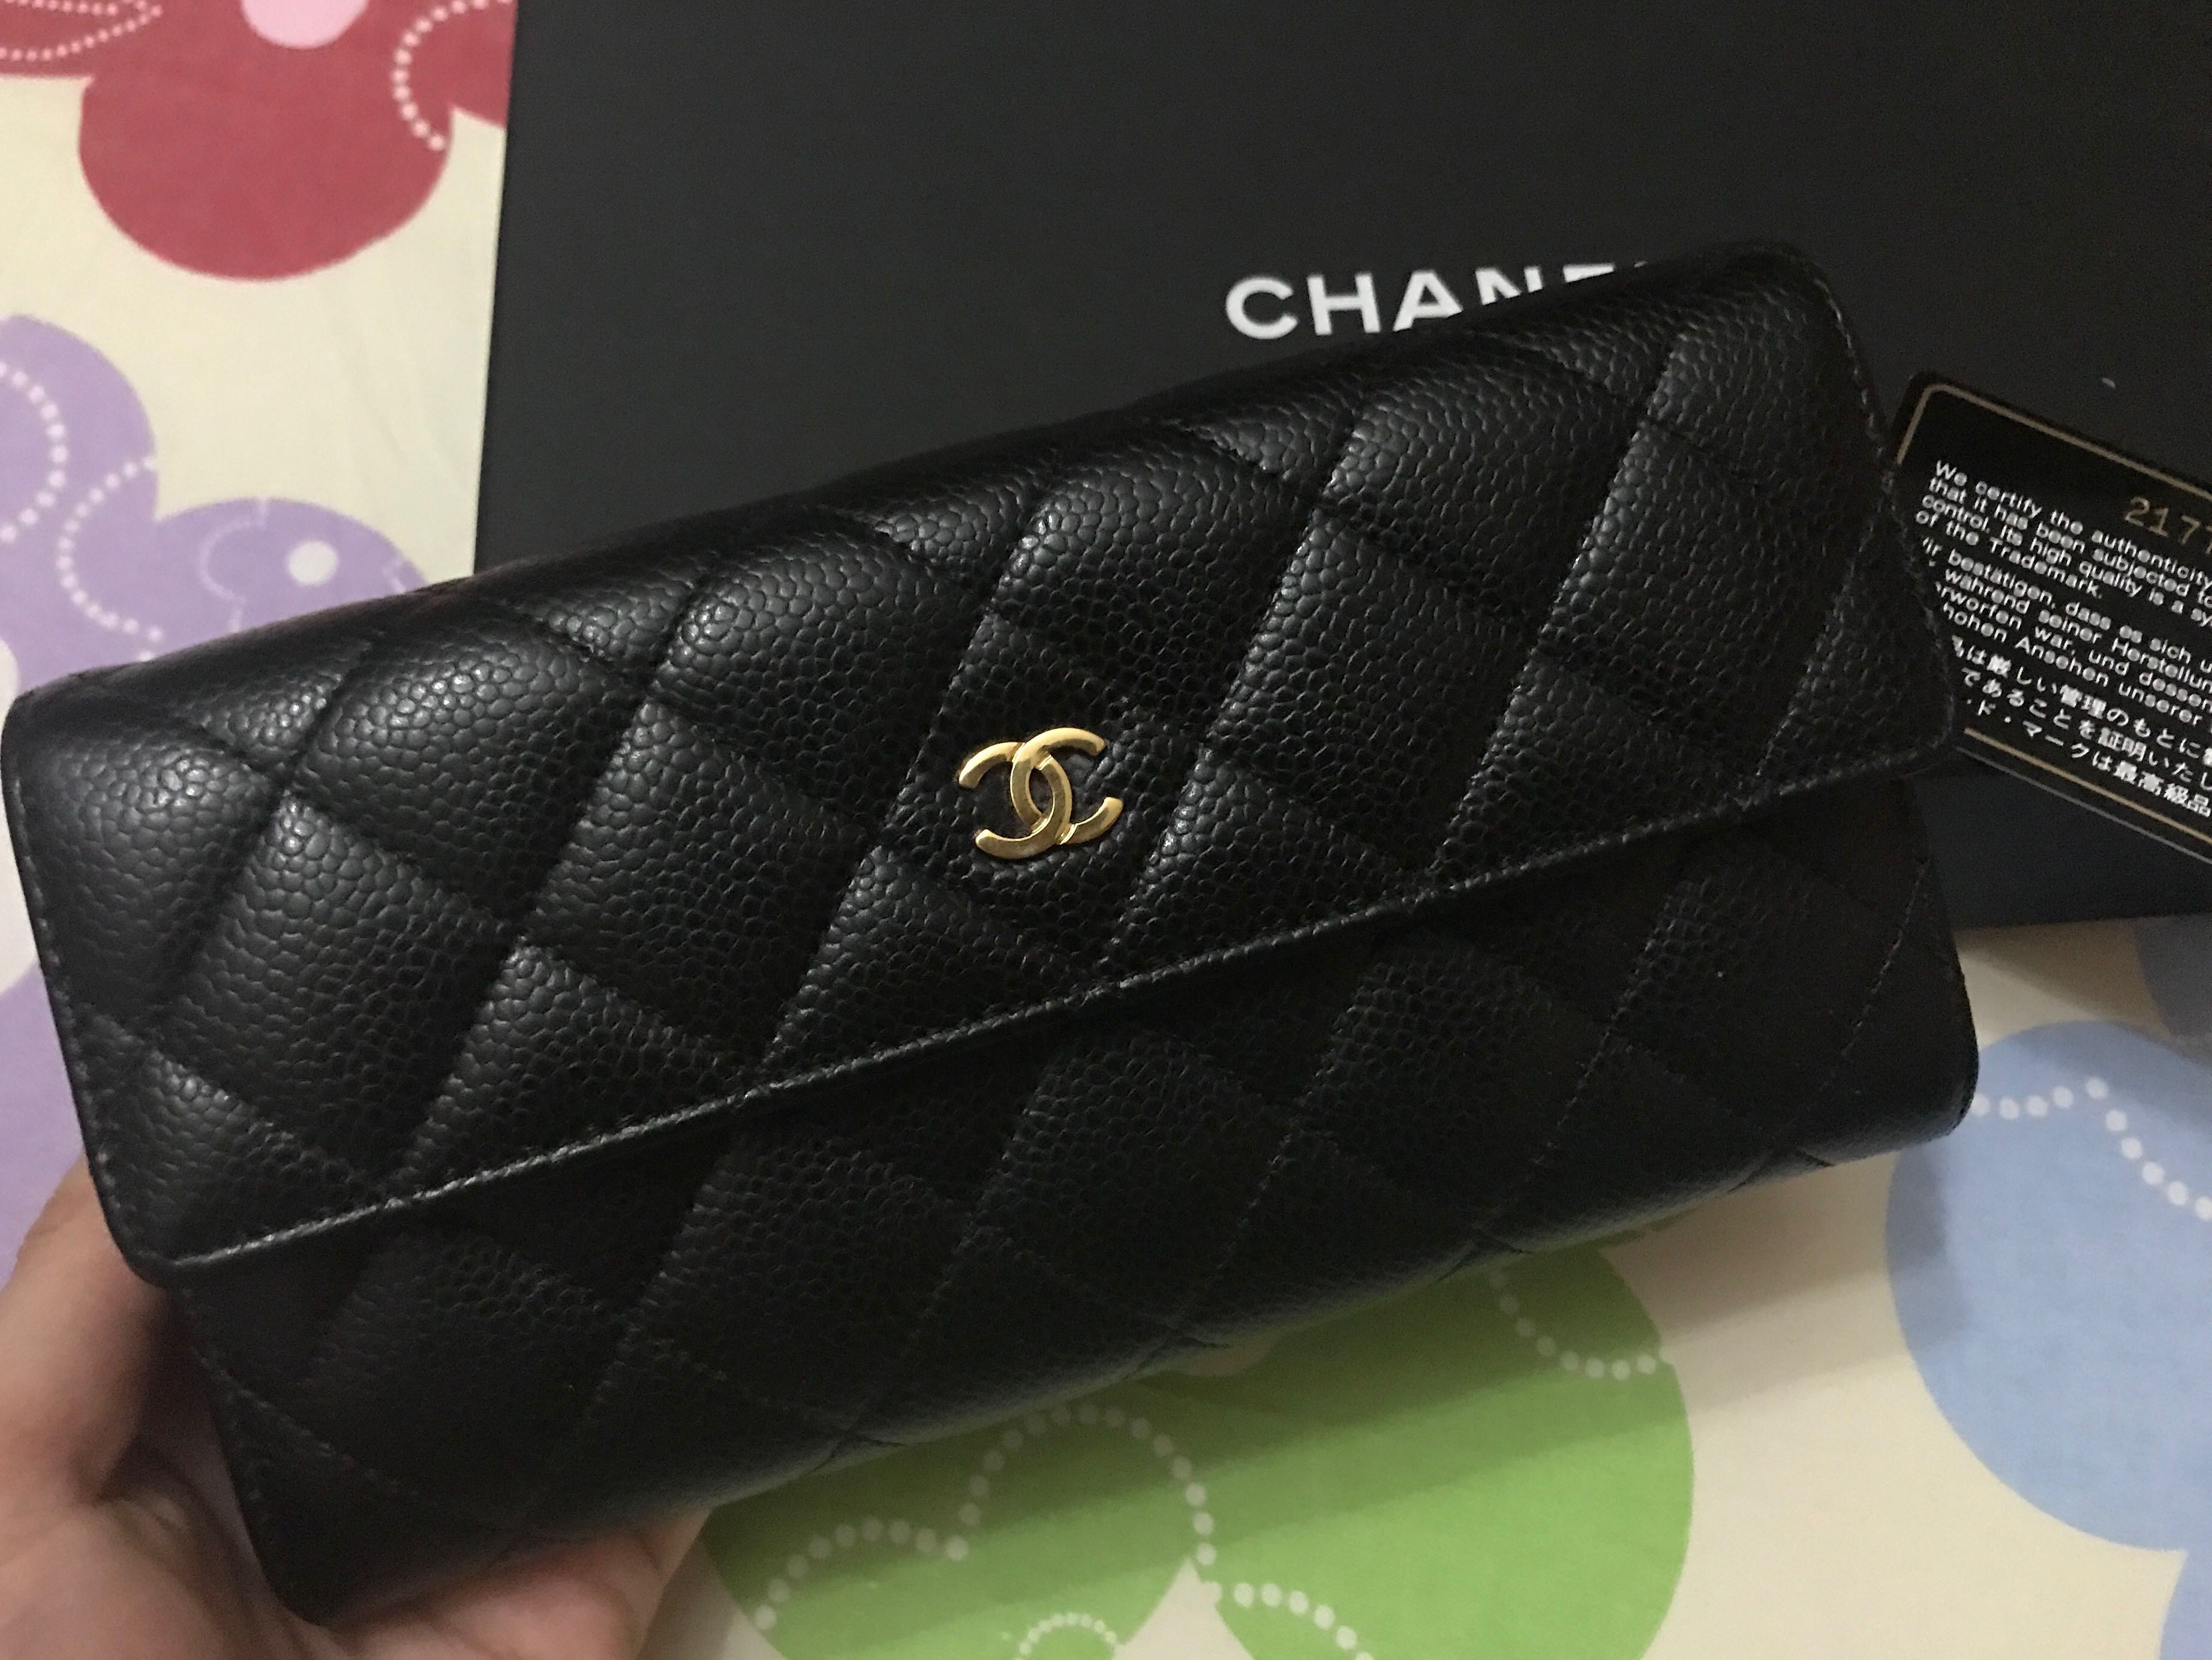 Chanel Korea charges highest prices in Asia  The Korea Times